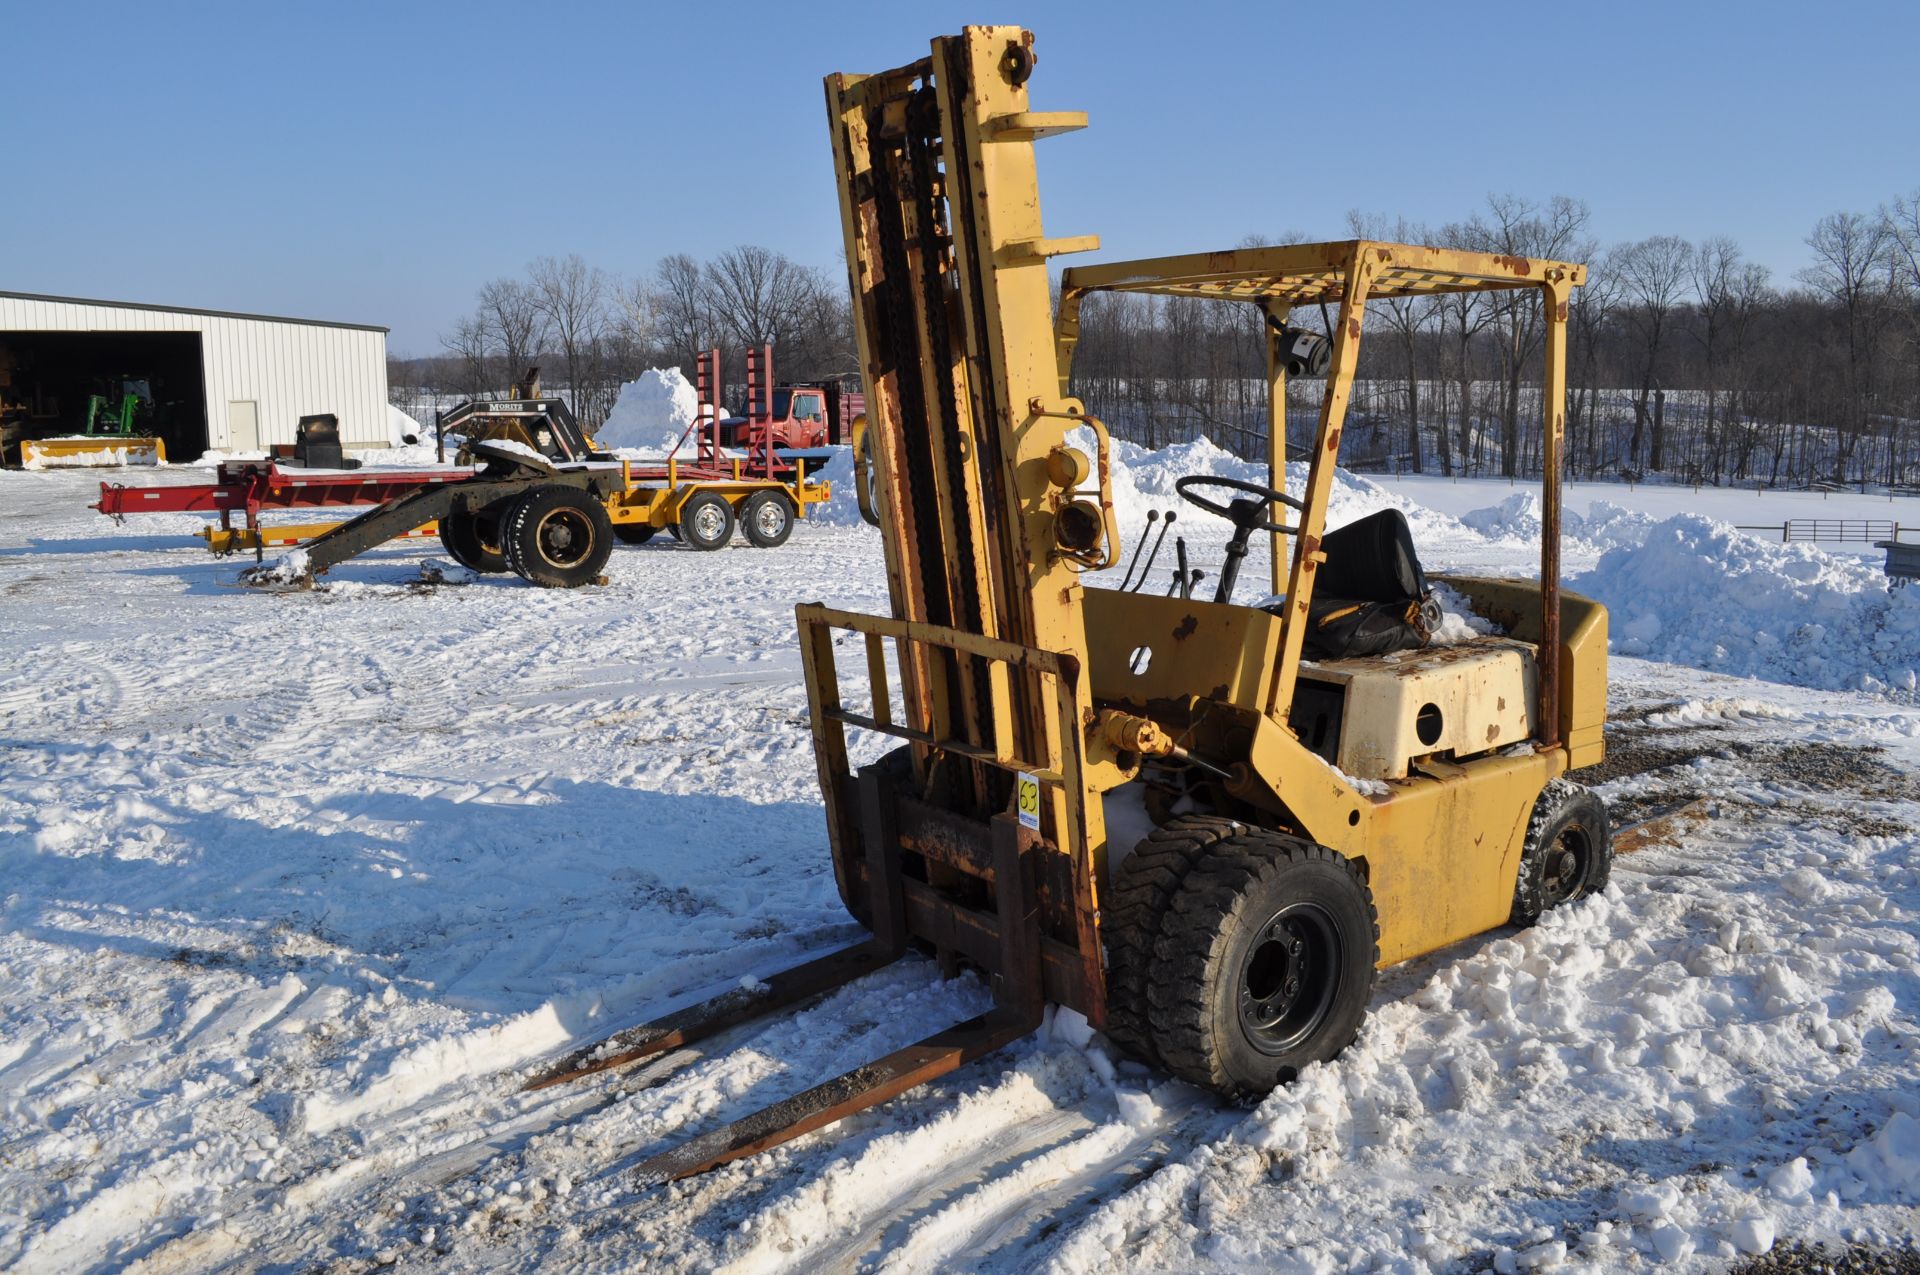 TCM forklift, gasoline, 7.00-12 front duals, 6.90/6.00-9 rear, 2 stage mast, NON-RUNNING